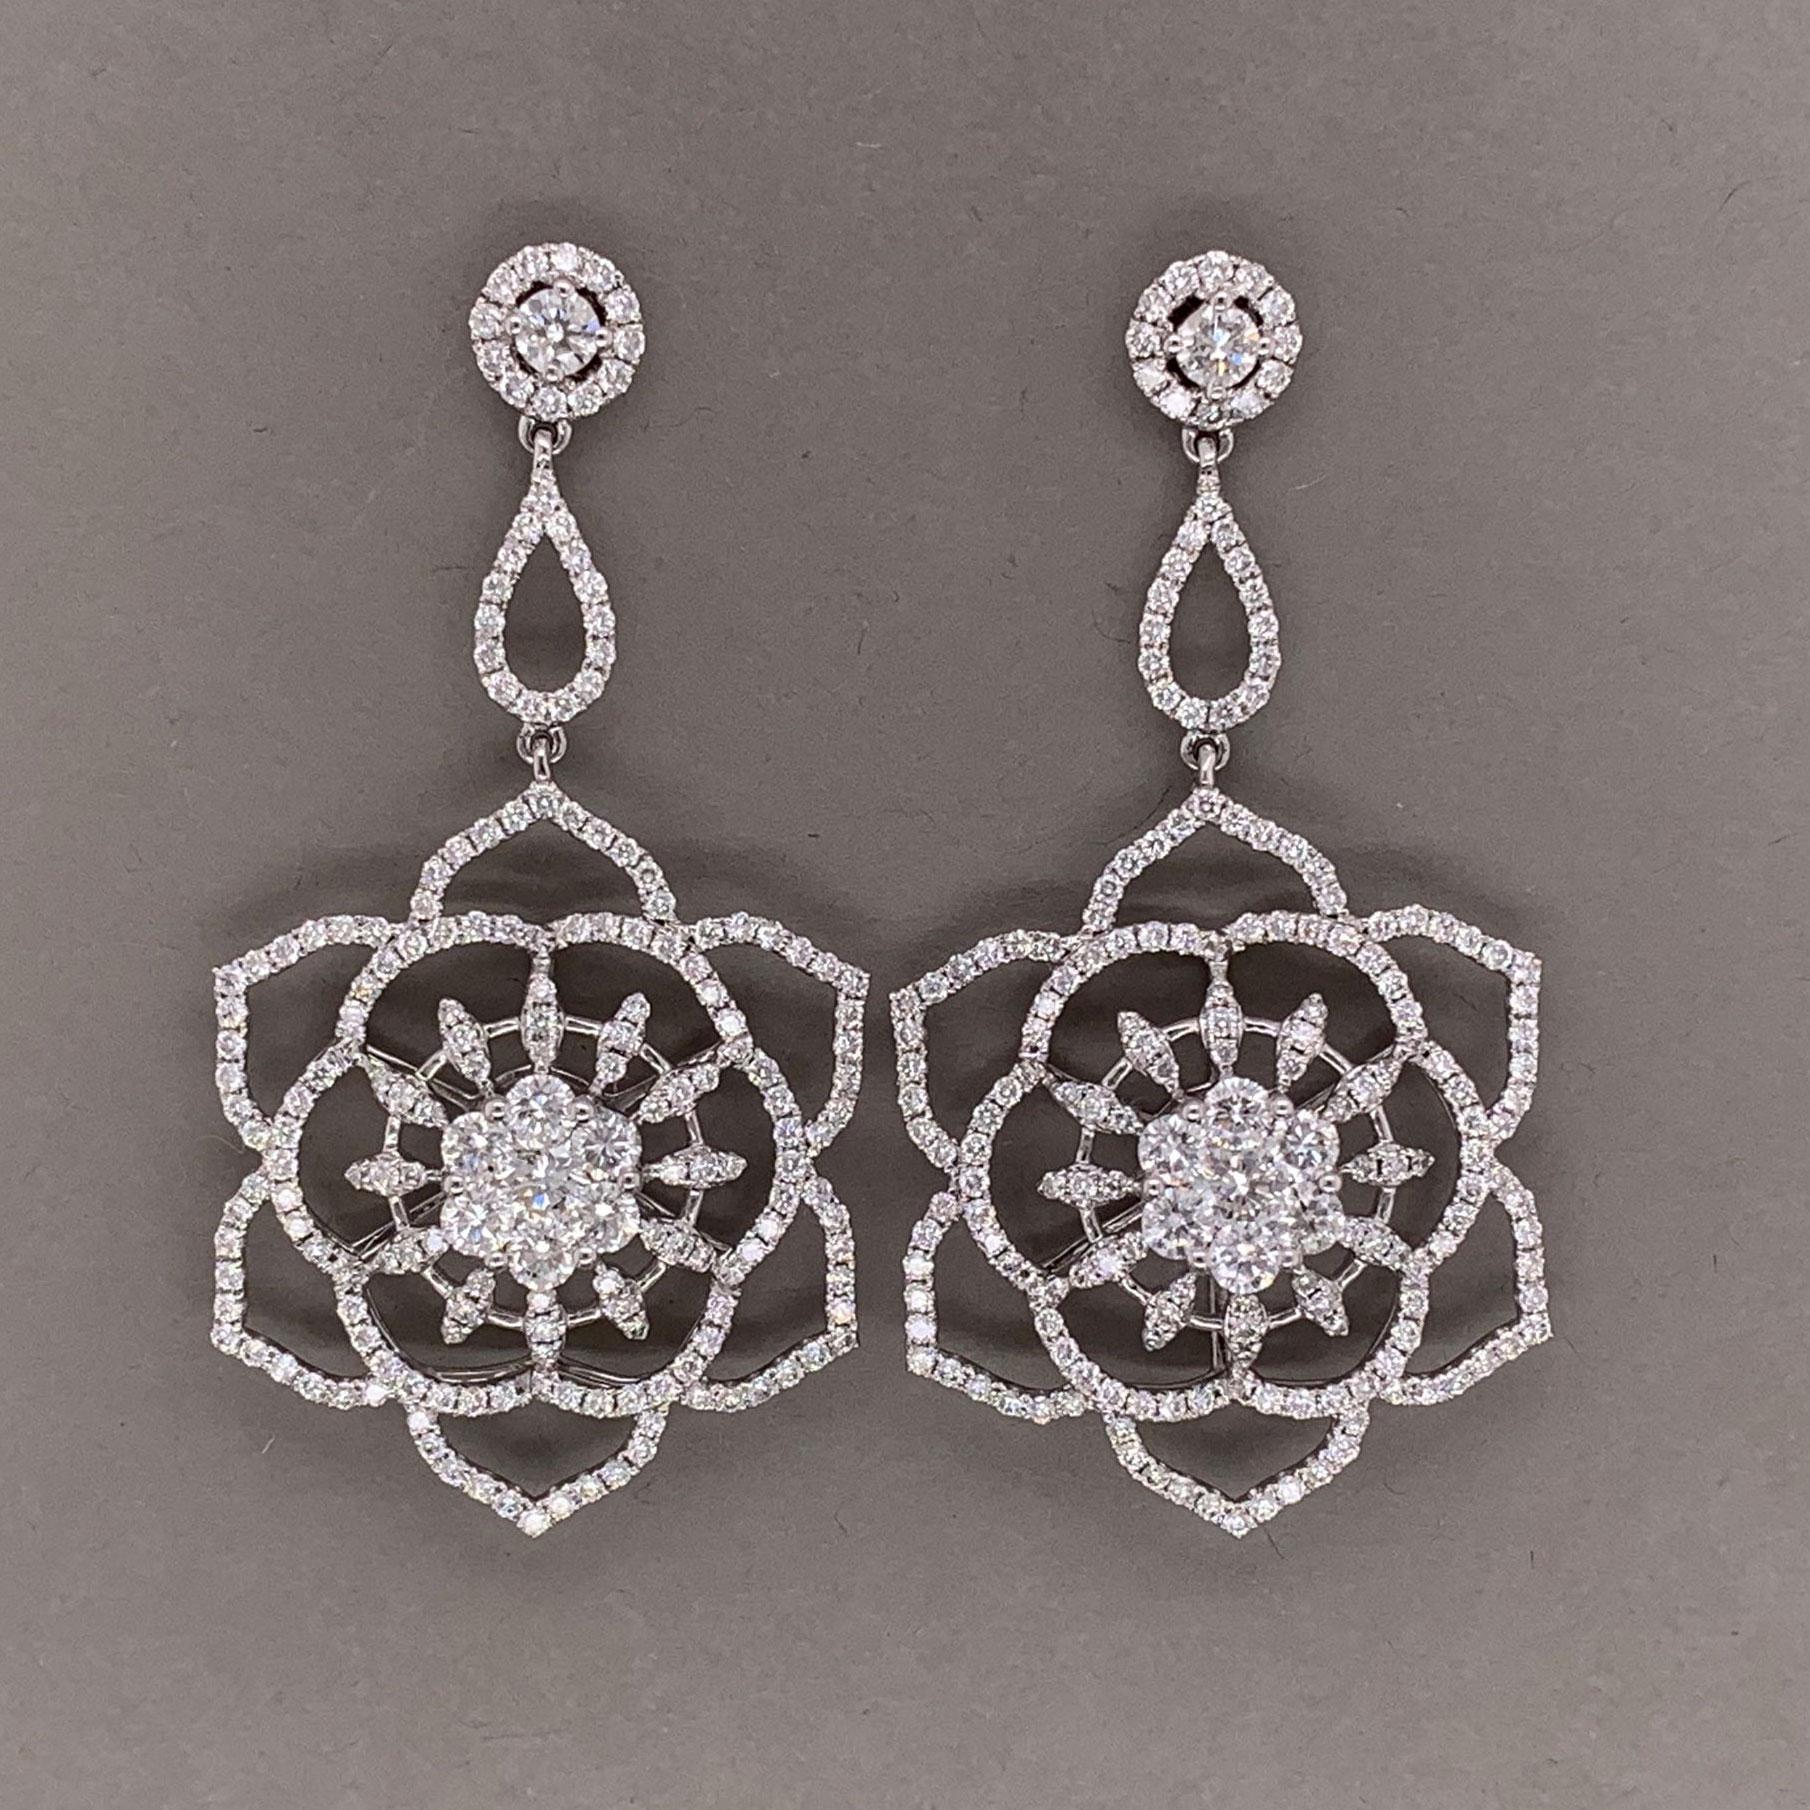 Dance in style with these long drop flower diamond earrings. They feature 3.42 carats of round brilliant cut diamonds which are set in 18k white gold. They depict blooming flowers which are the drops of these stylish earrings.


Length: 1.6 inches